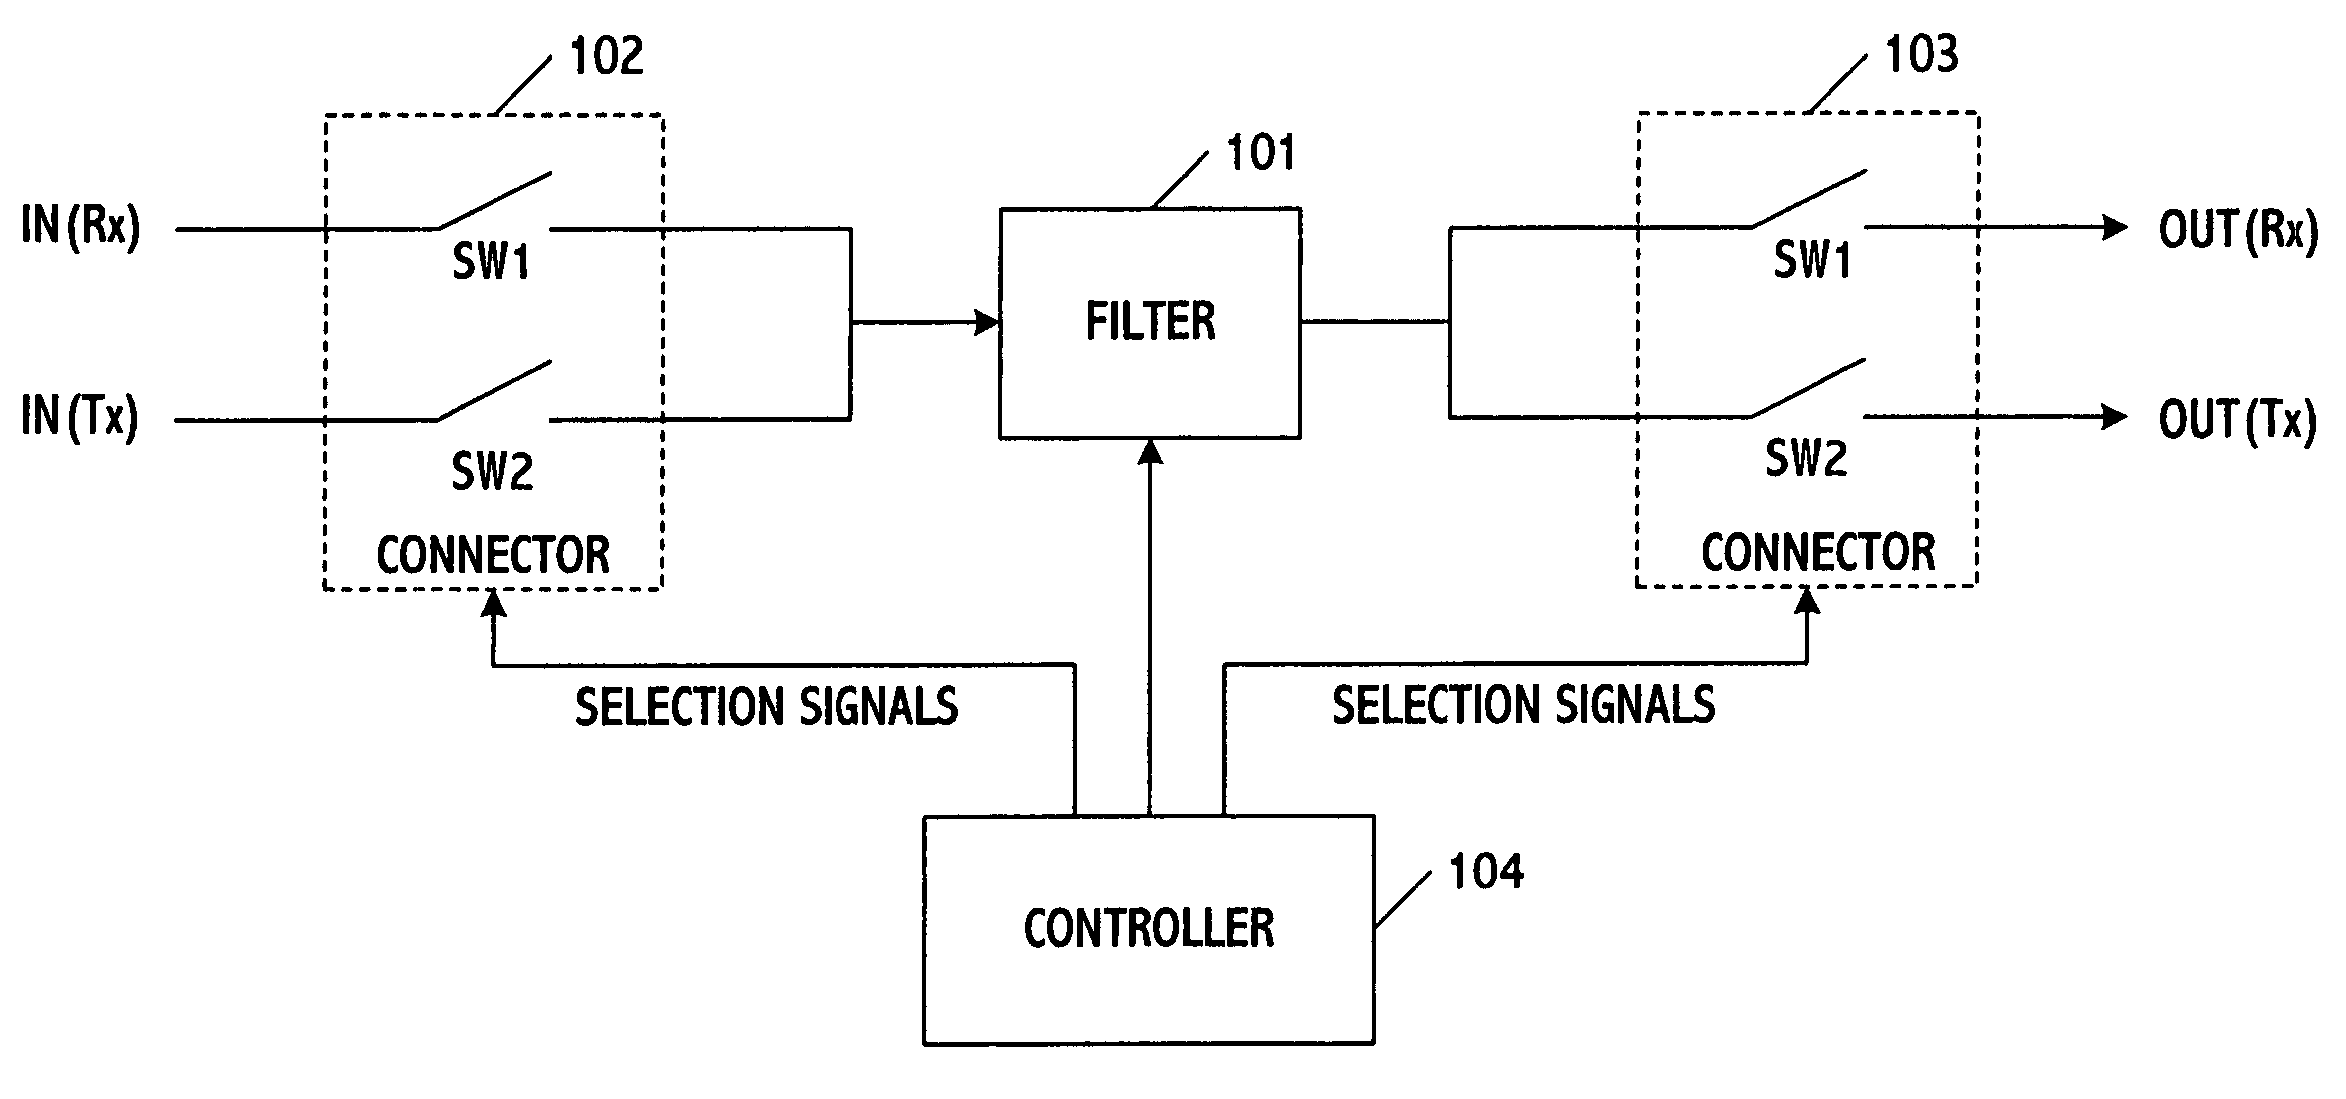 System and method for filtering signals in a transceiver